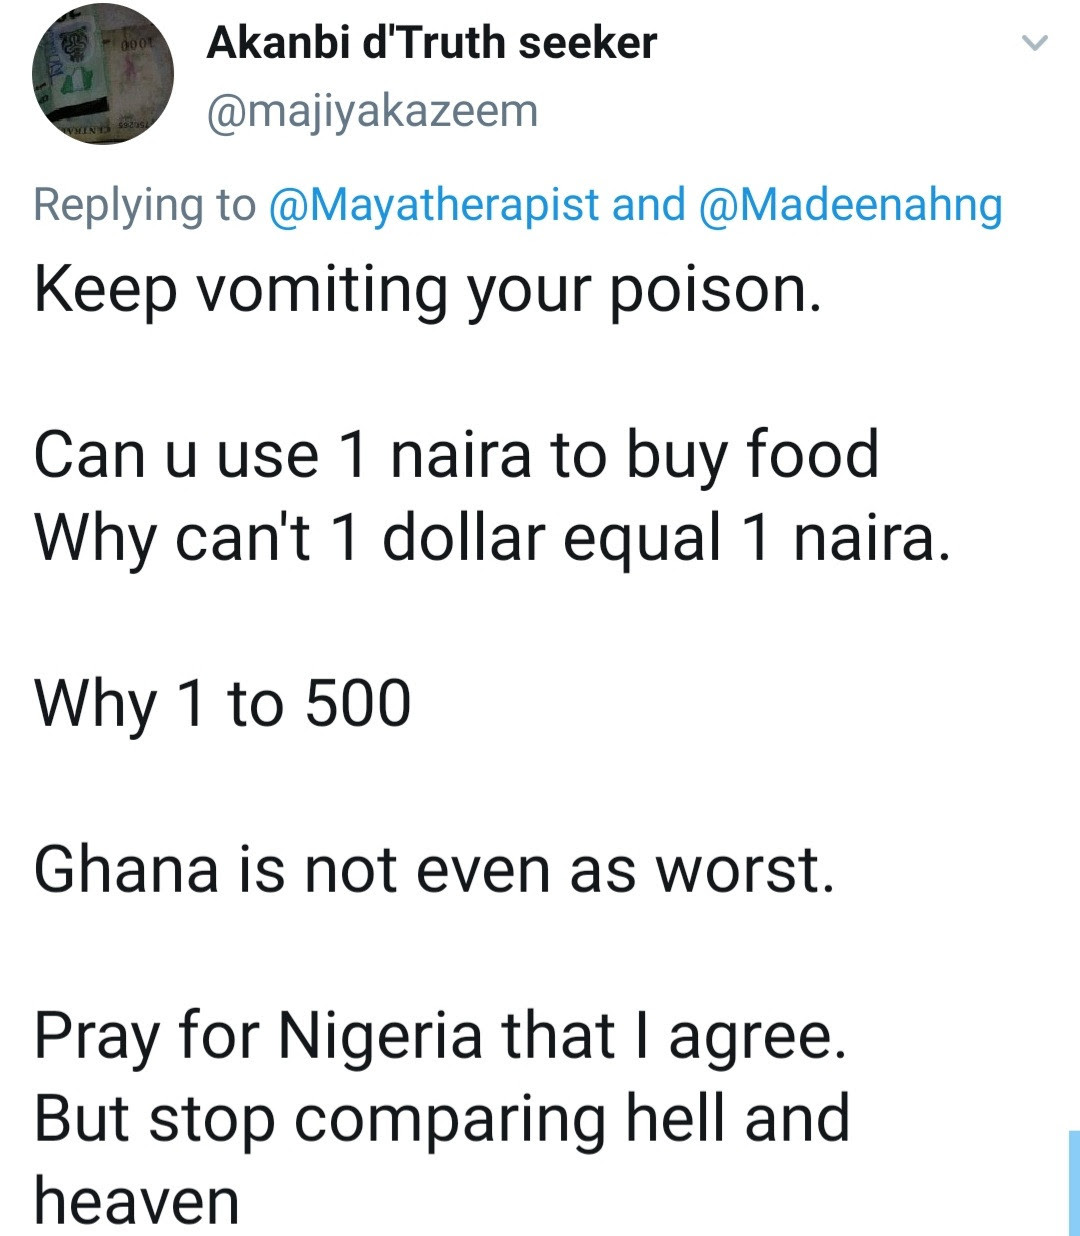 Trending message to Nigerians from a Nigerian living in the US sparks conversation